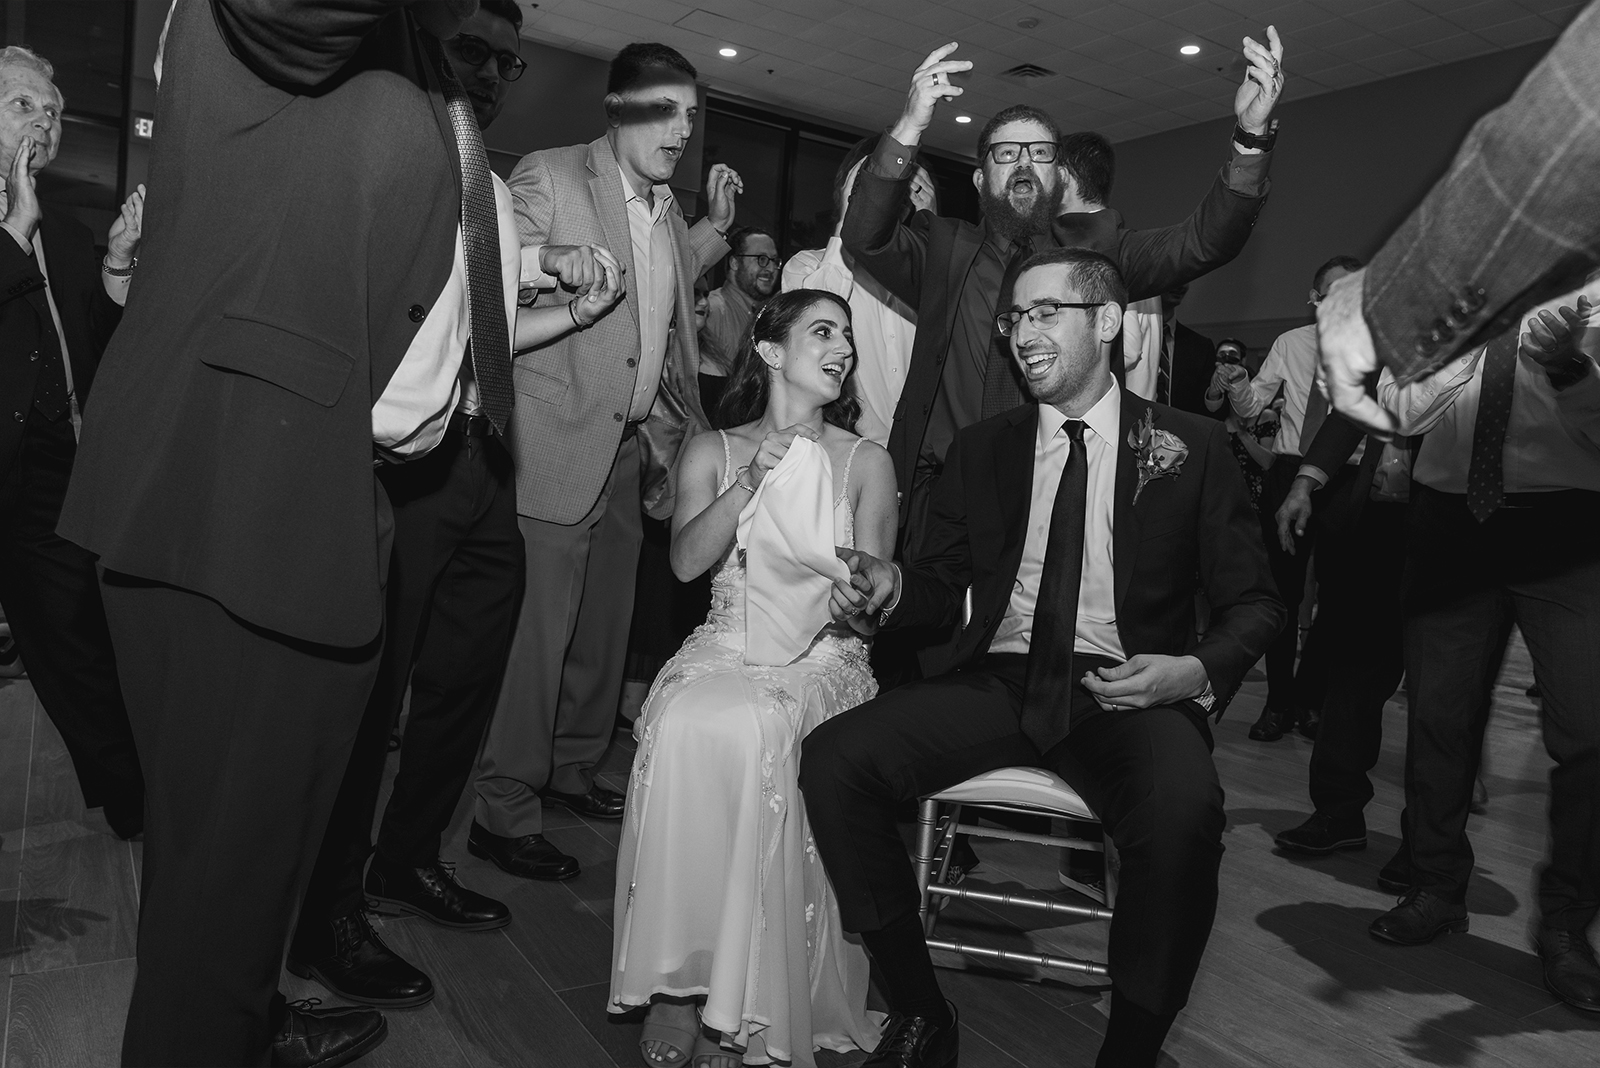 Bride and groom in chairs, dance, fun, black and white, candid wedding photo, Jewish wedding, classy wedding ceremony at Landerhaven, Mayfield Heights OH